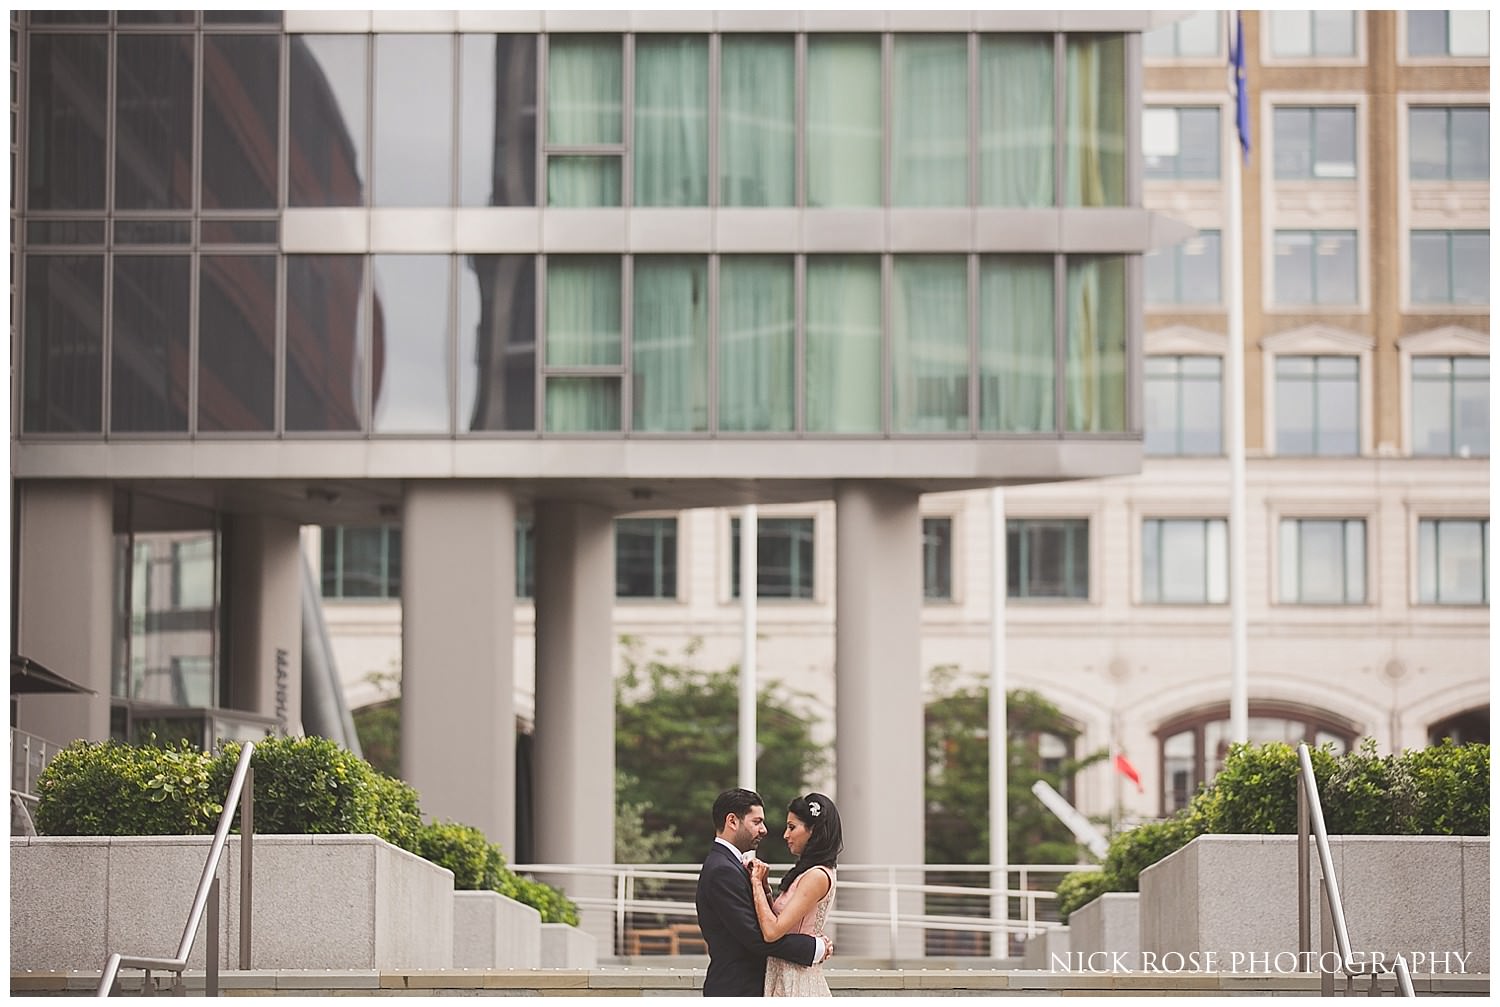  Bride and Groom Indian wedding photography portrait at Canary Wharf 